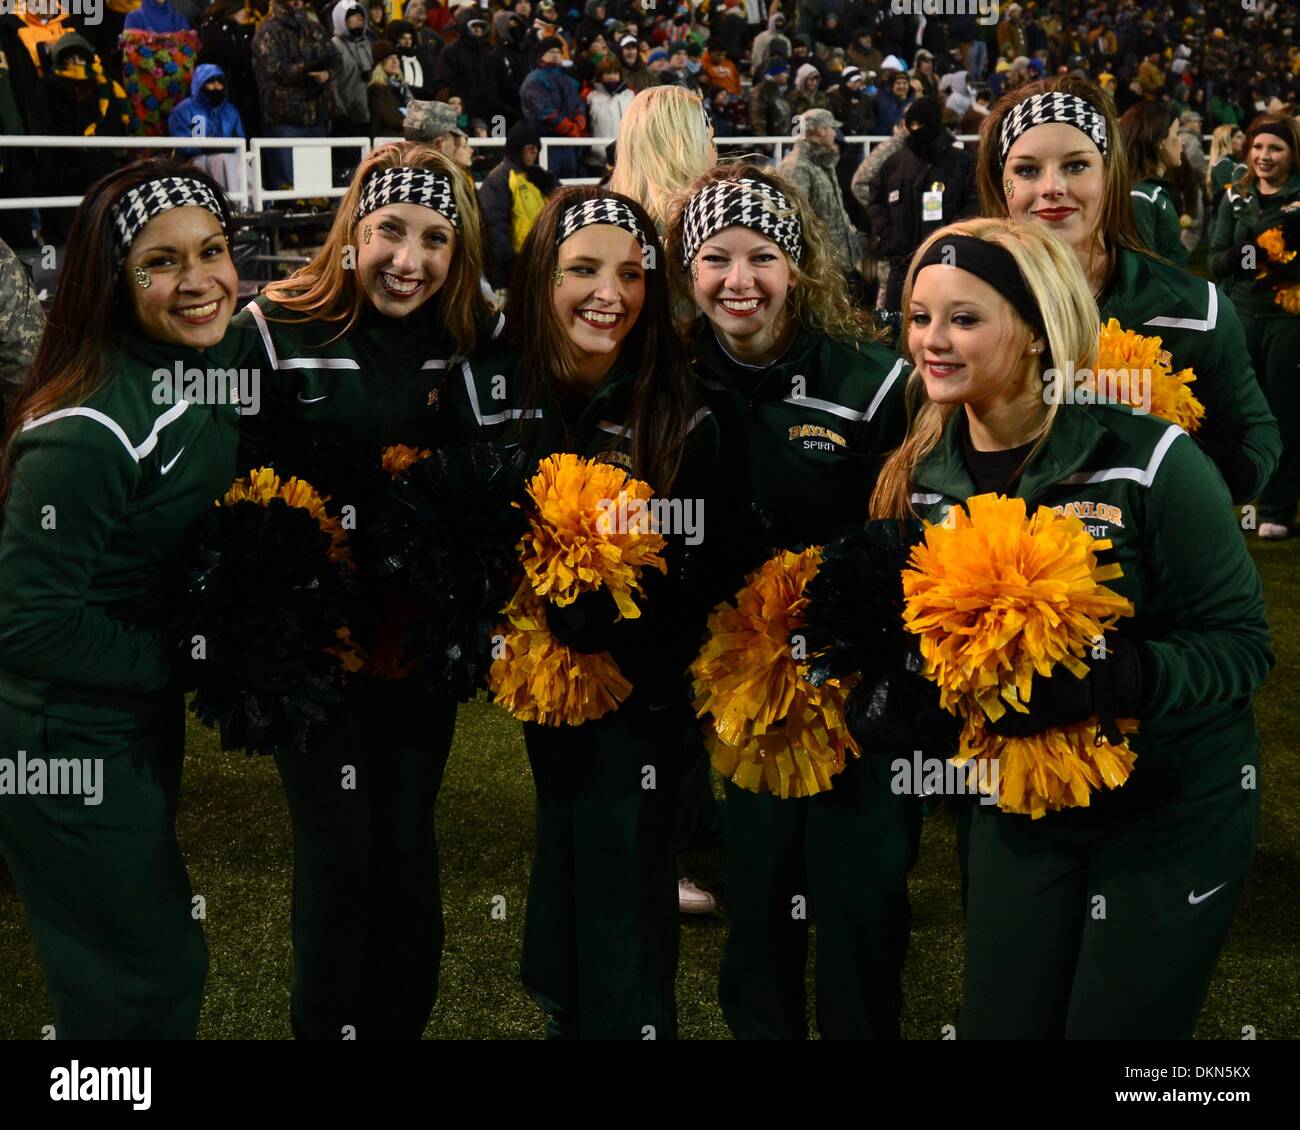 Dec 7, 2013. Cheerleaders of the Baylor Bears vs the Texas Longhorns at Floyd Casey Stadium in Waco Texas. Baylor defeats 30-10 to win the Big 12 Championship. Stock Photo